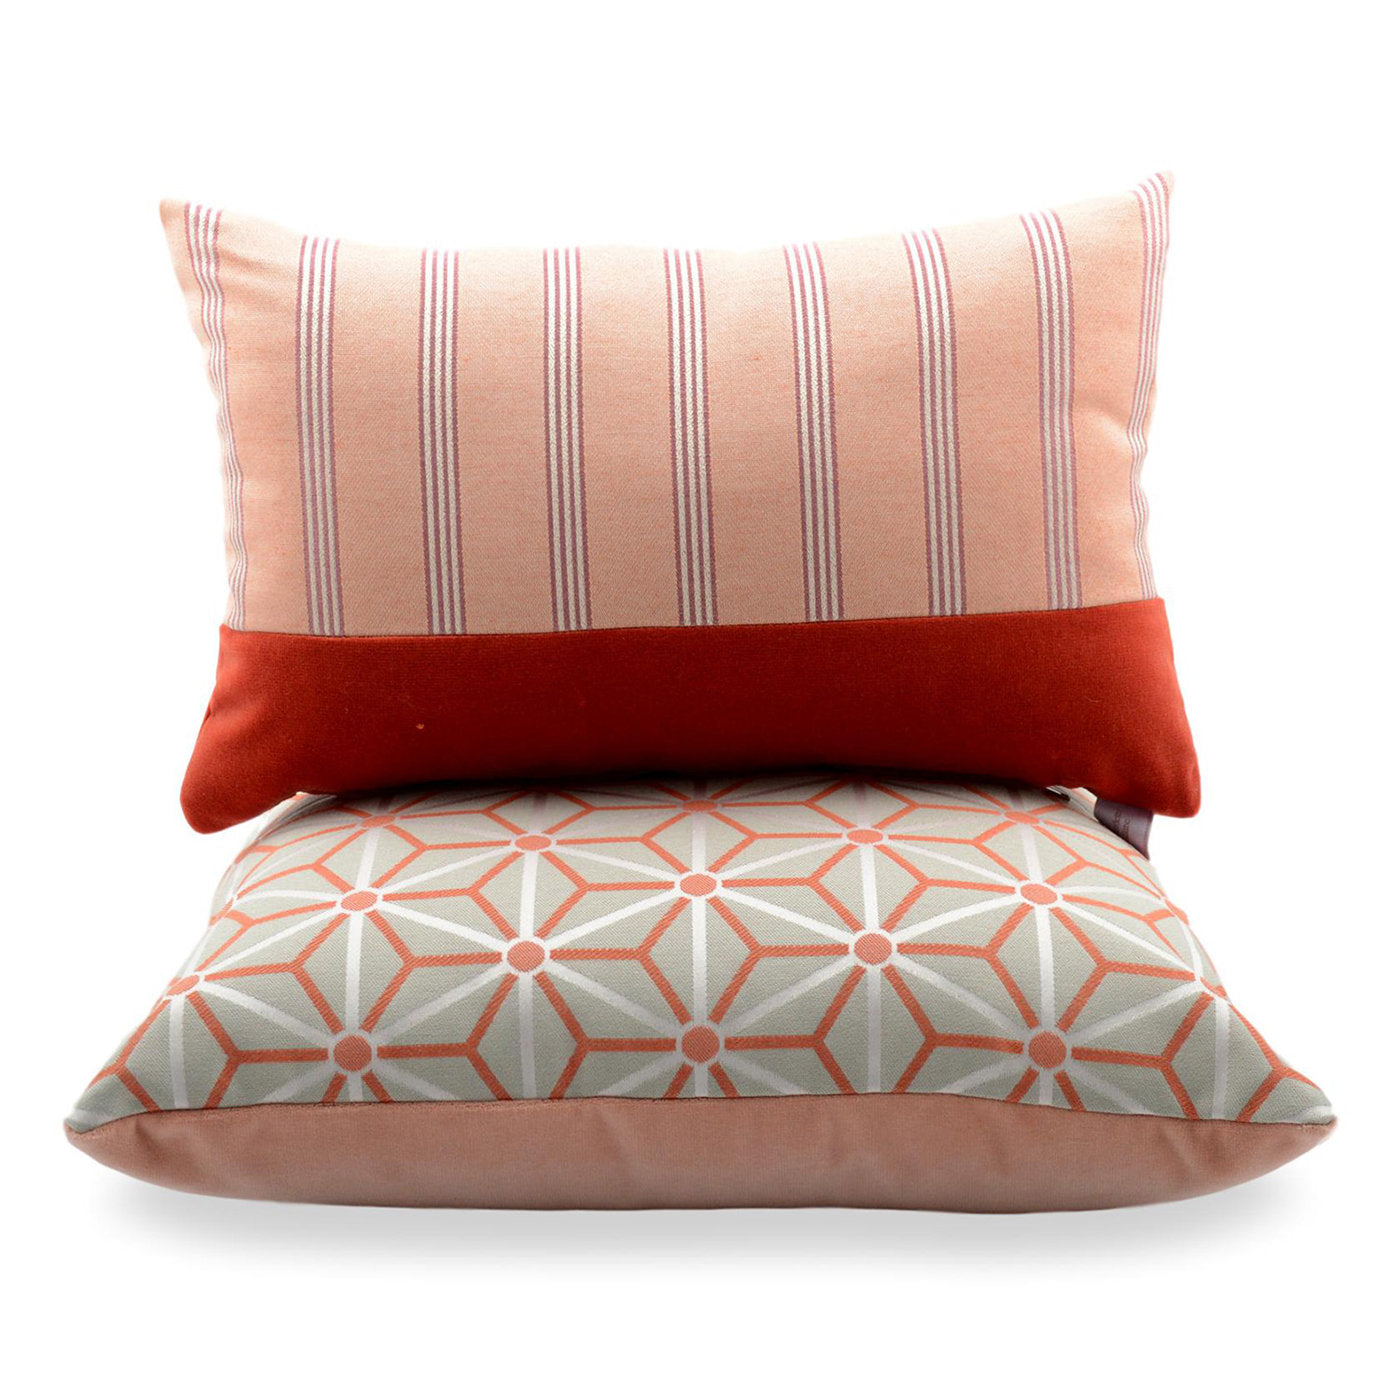 Rectangular Simple Orizzontal Cushion in striped jaquard fabric - Alternative view 2